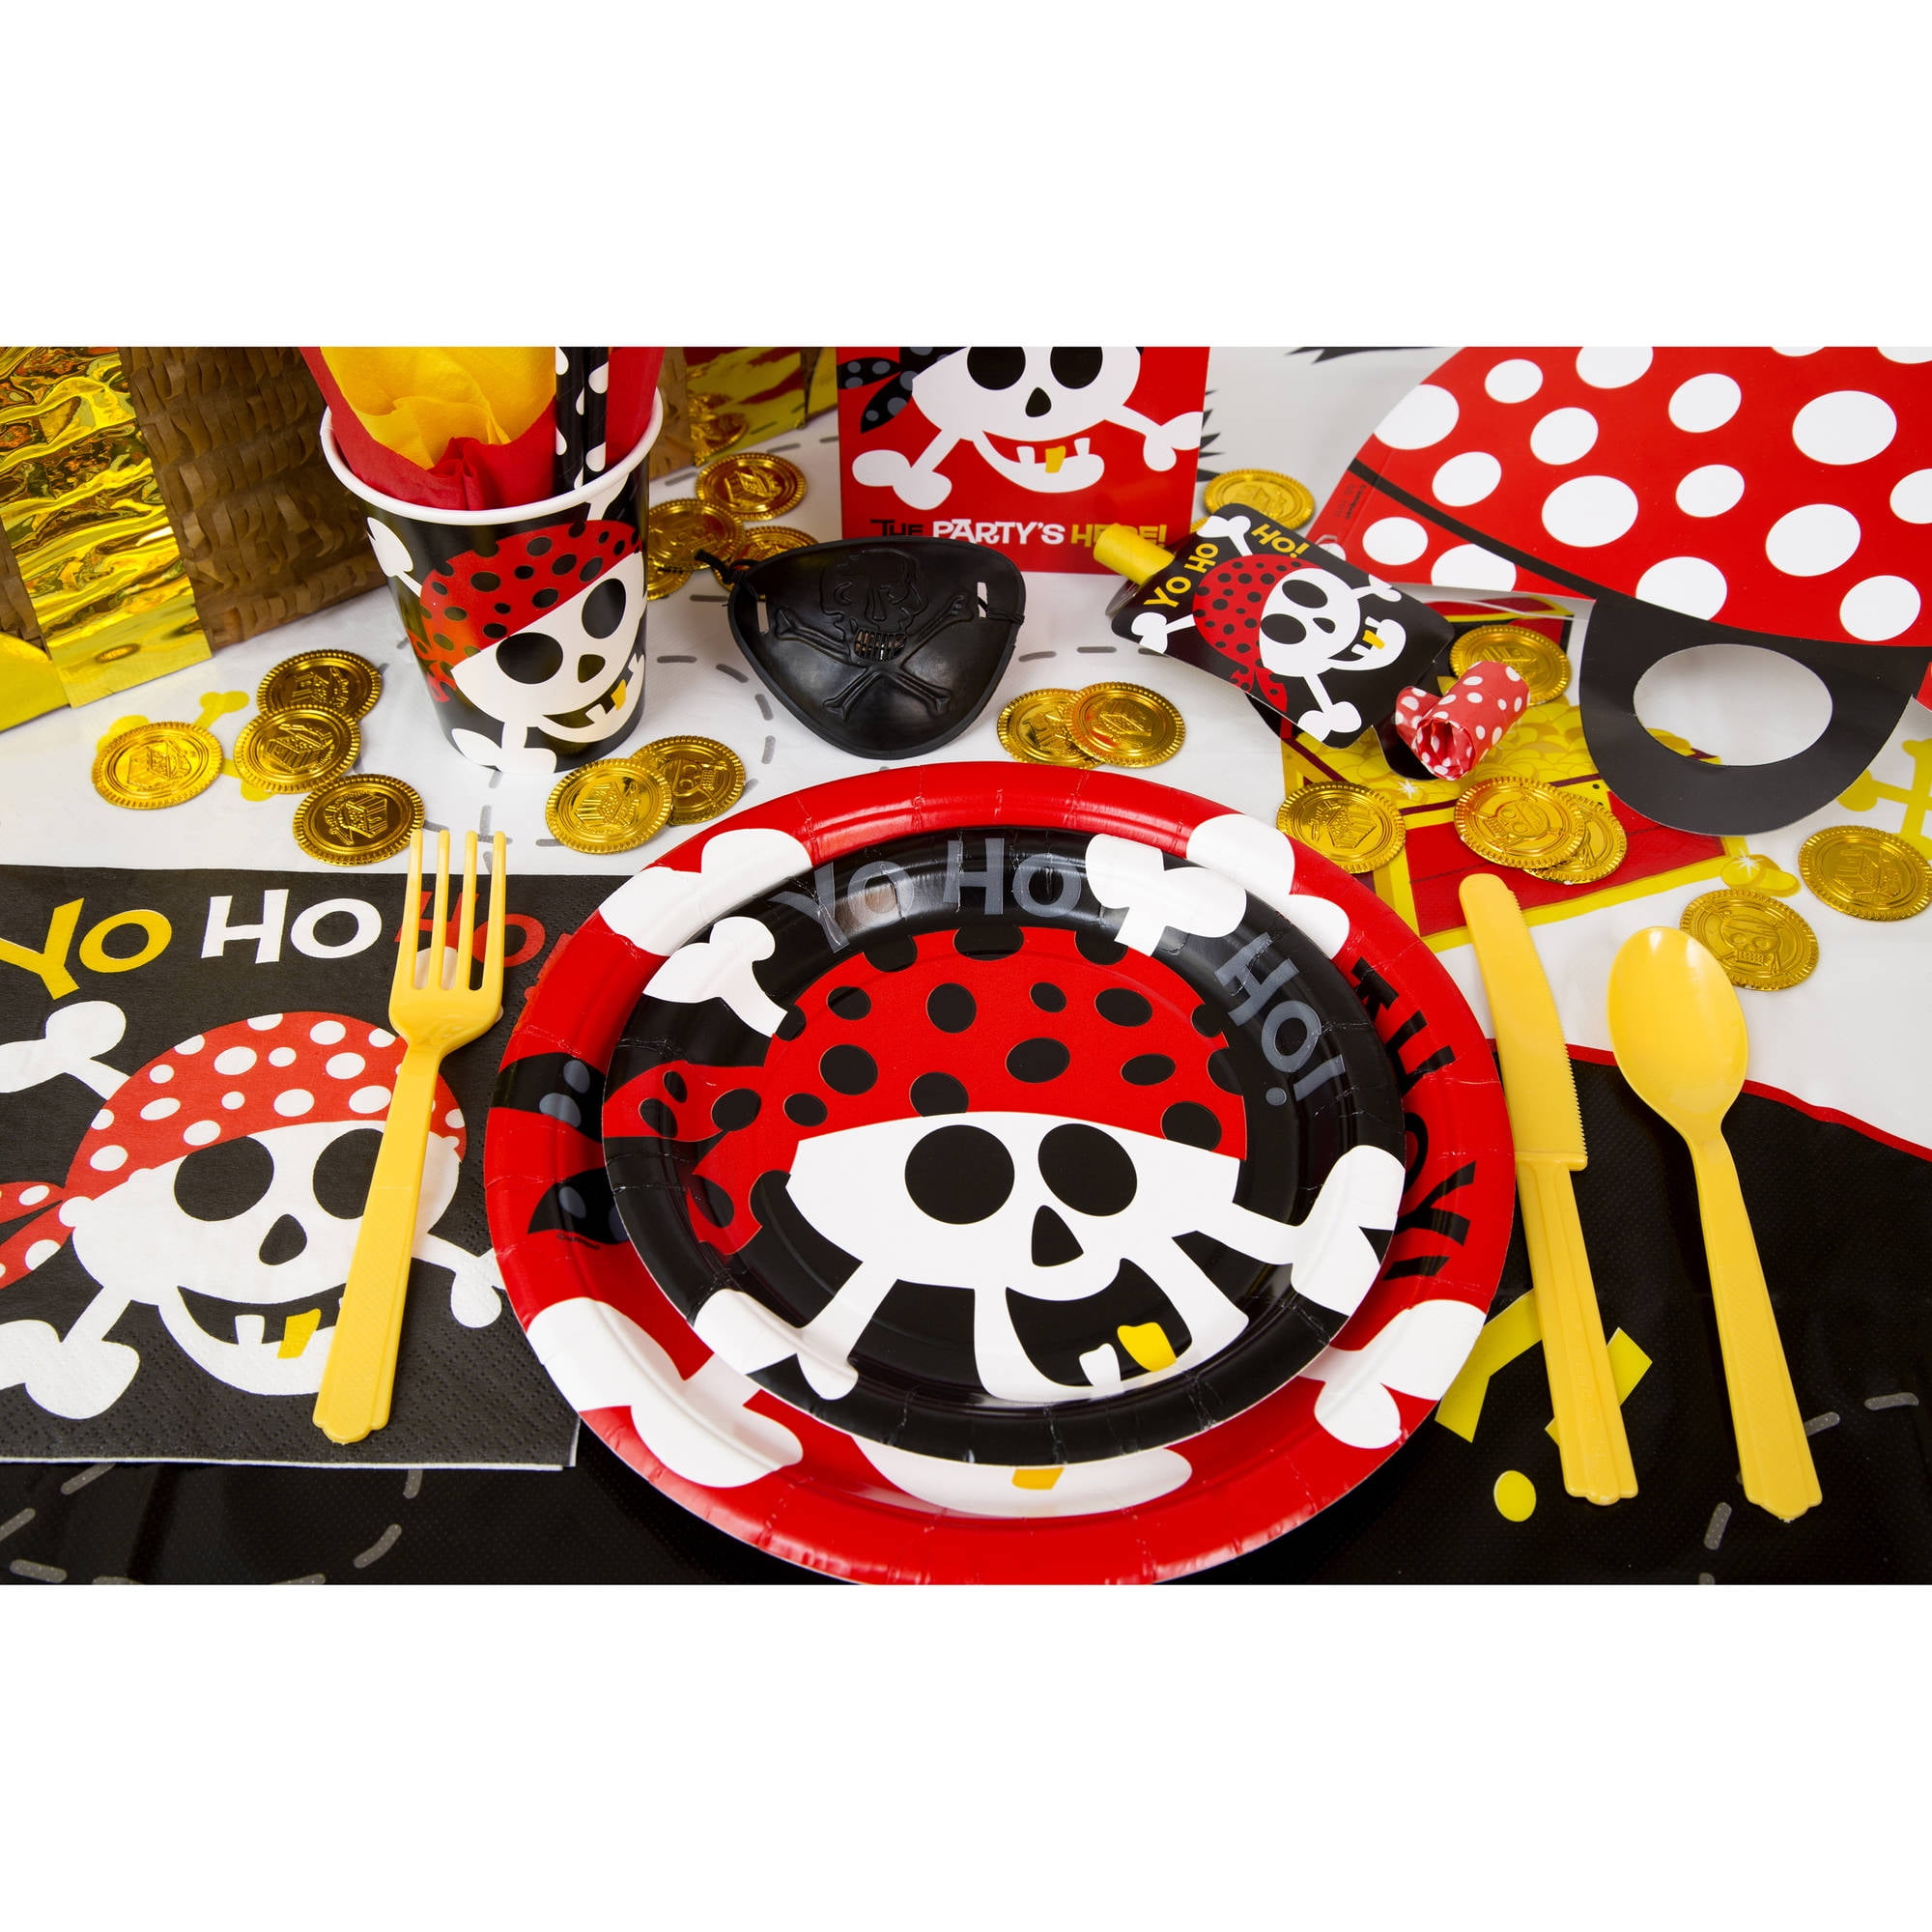 BIRTHDAY FUN PARTY AMSCAN PIRATES PLASTIC TABLE COVER 